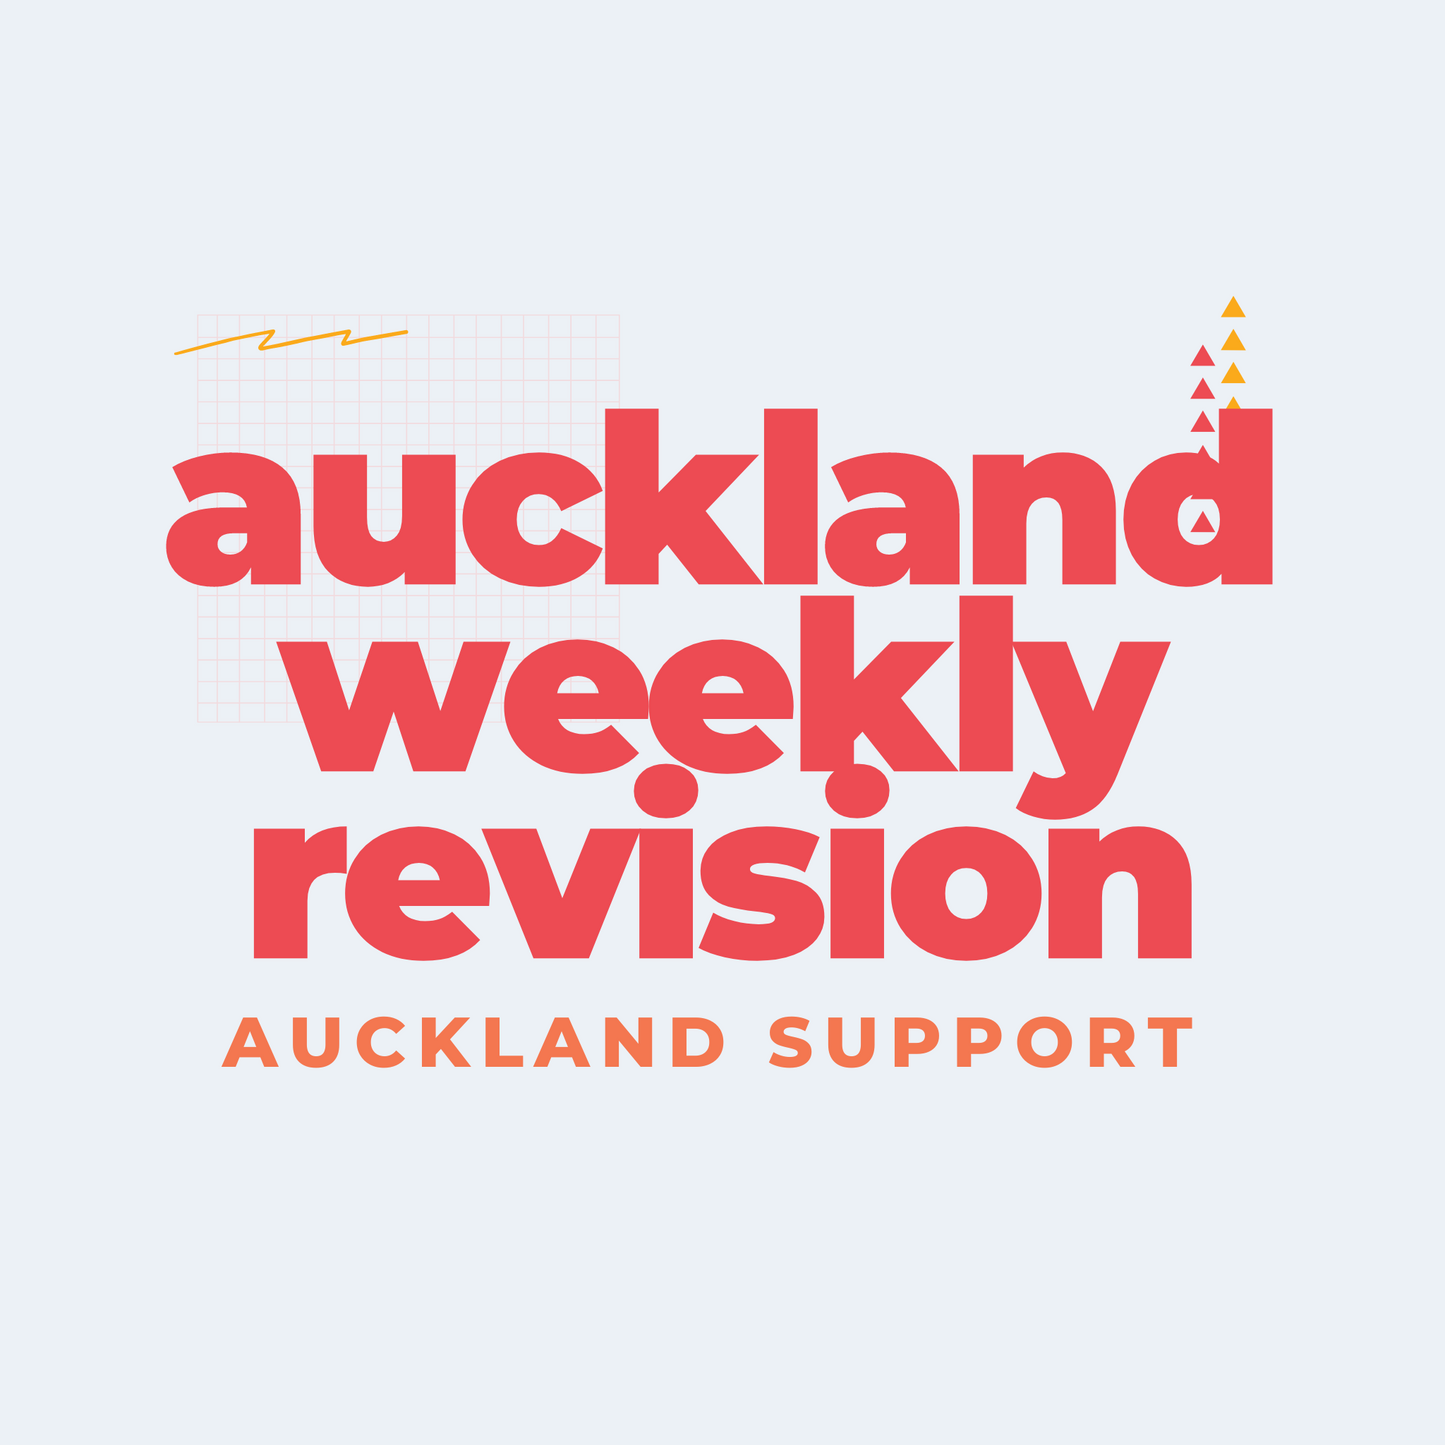 Auckland Weekly Revision